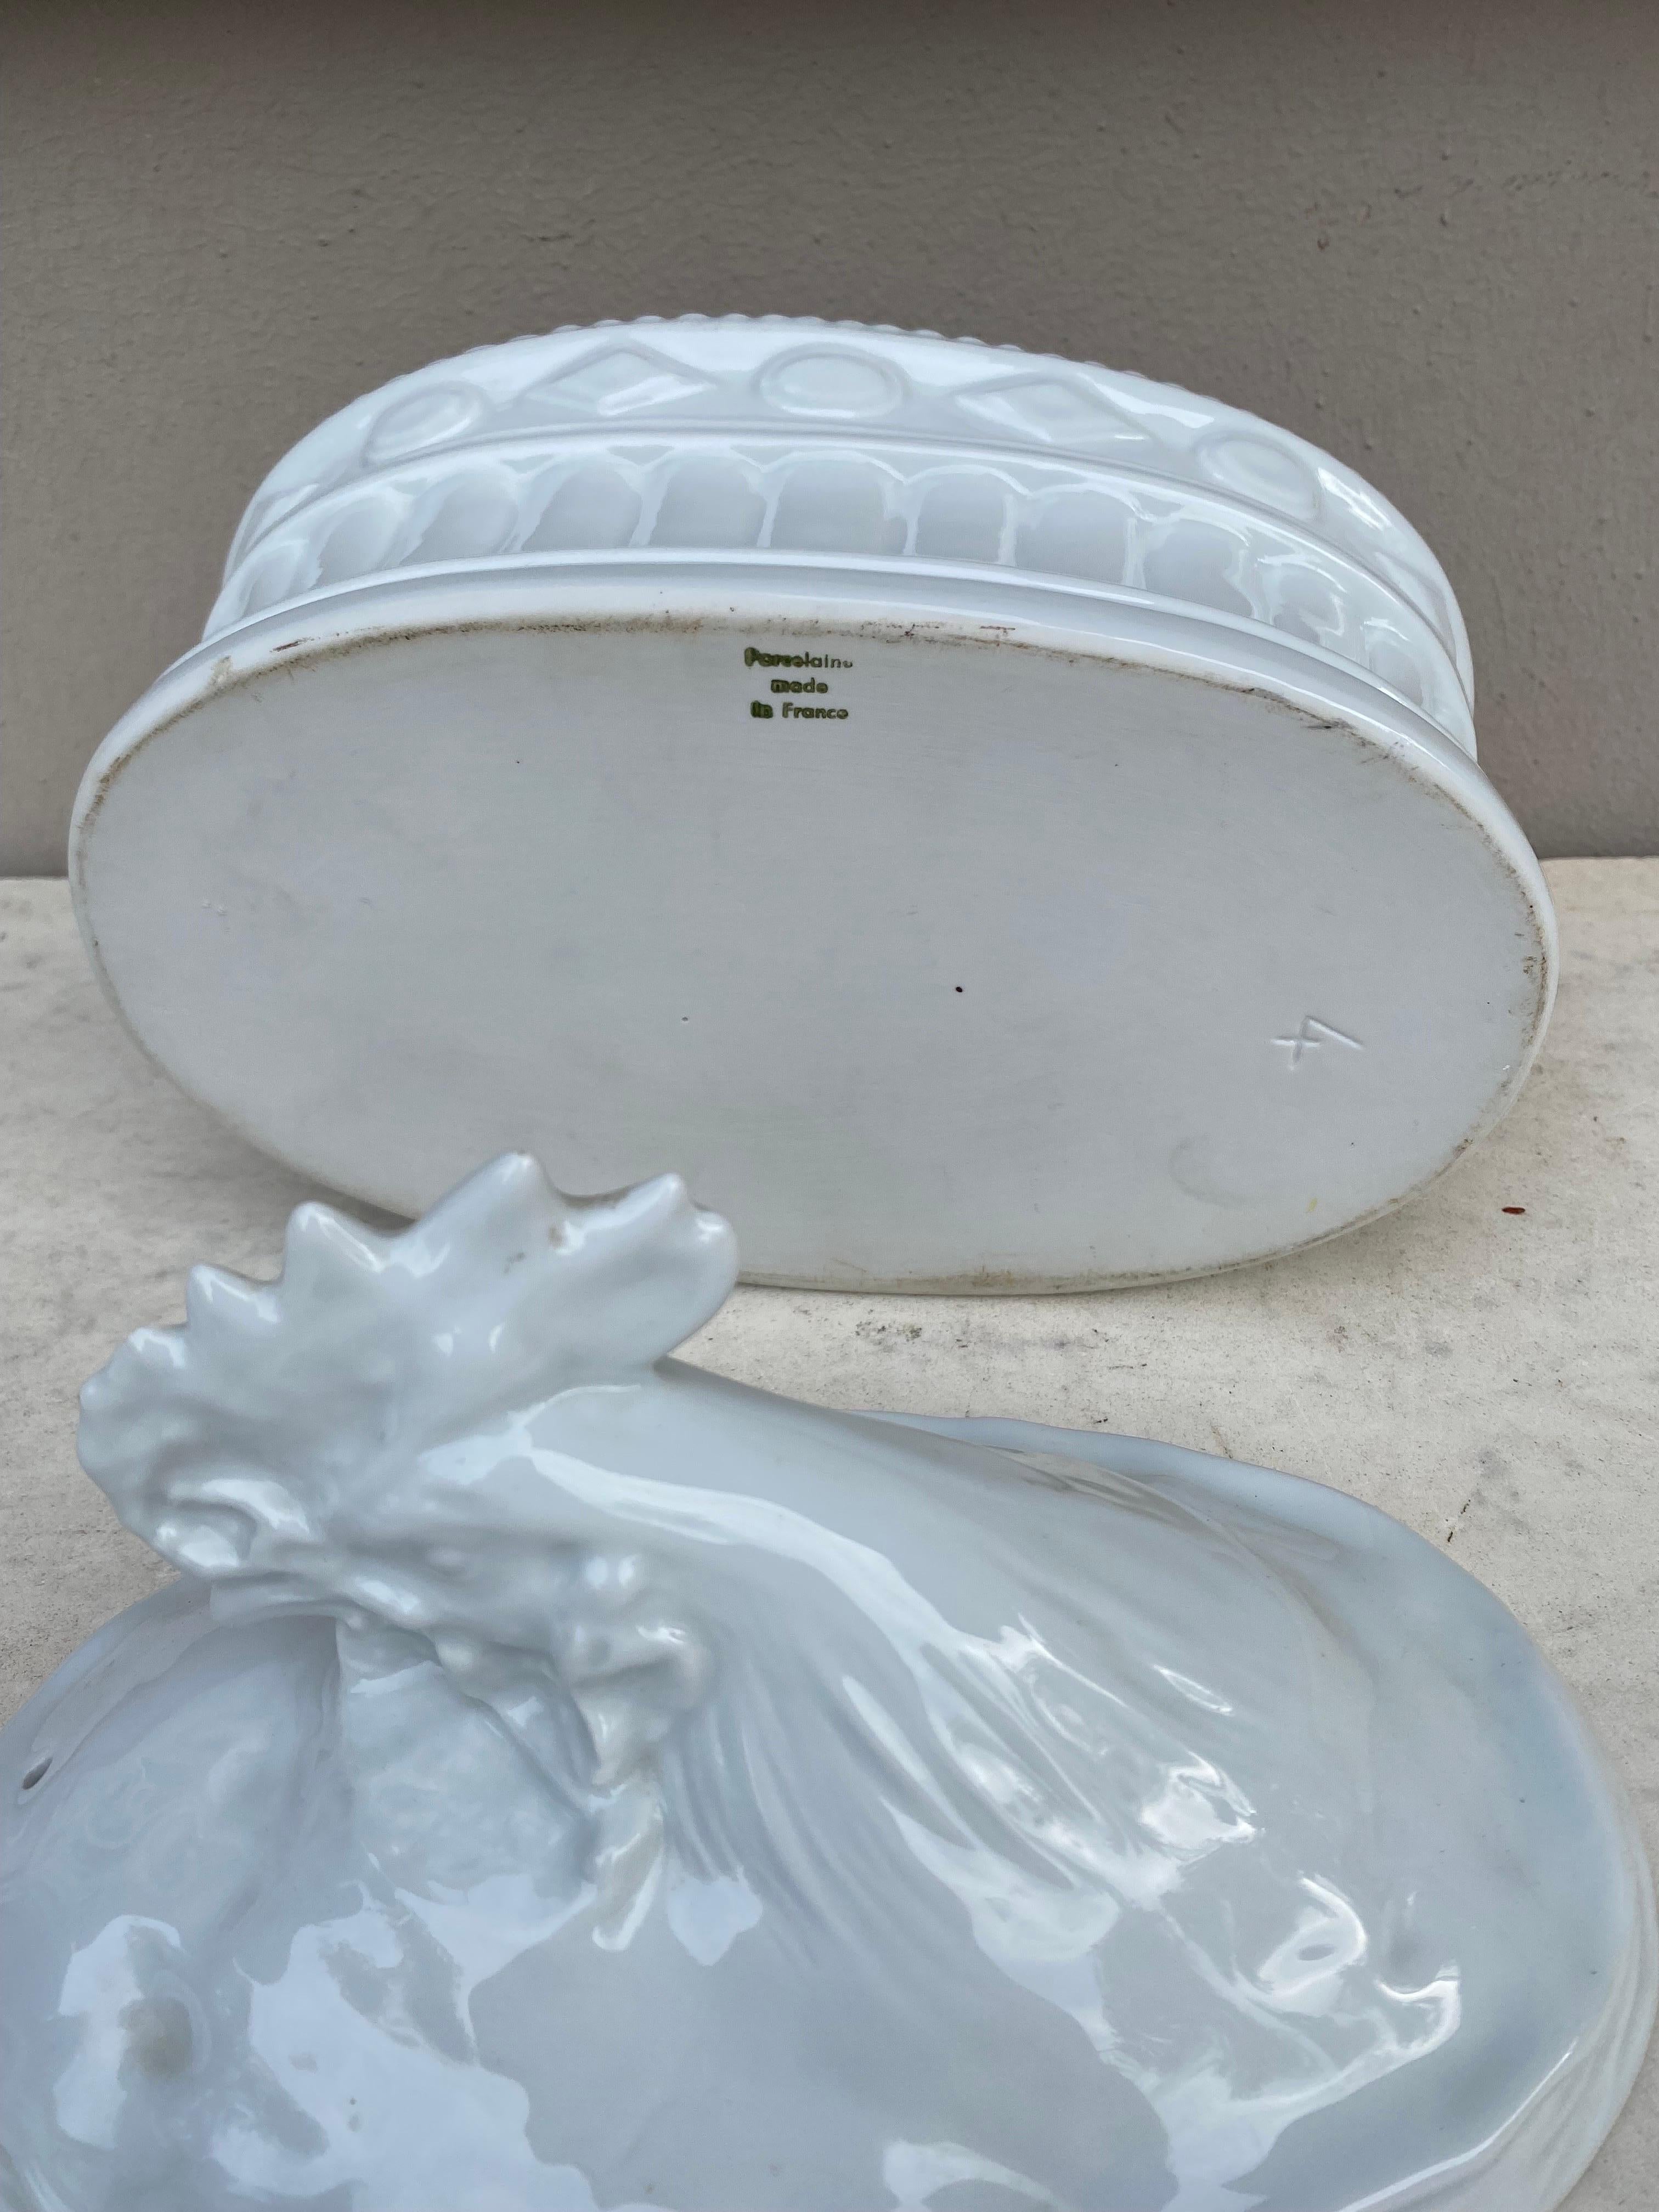 Mid-20th Century French Trompe L'oeil White Porcelain Rooster Pâté Tureen For Sale